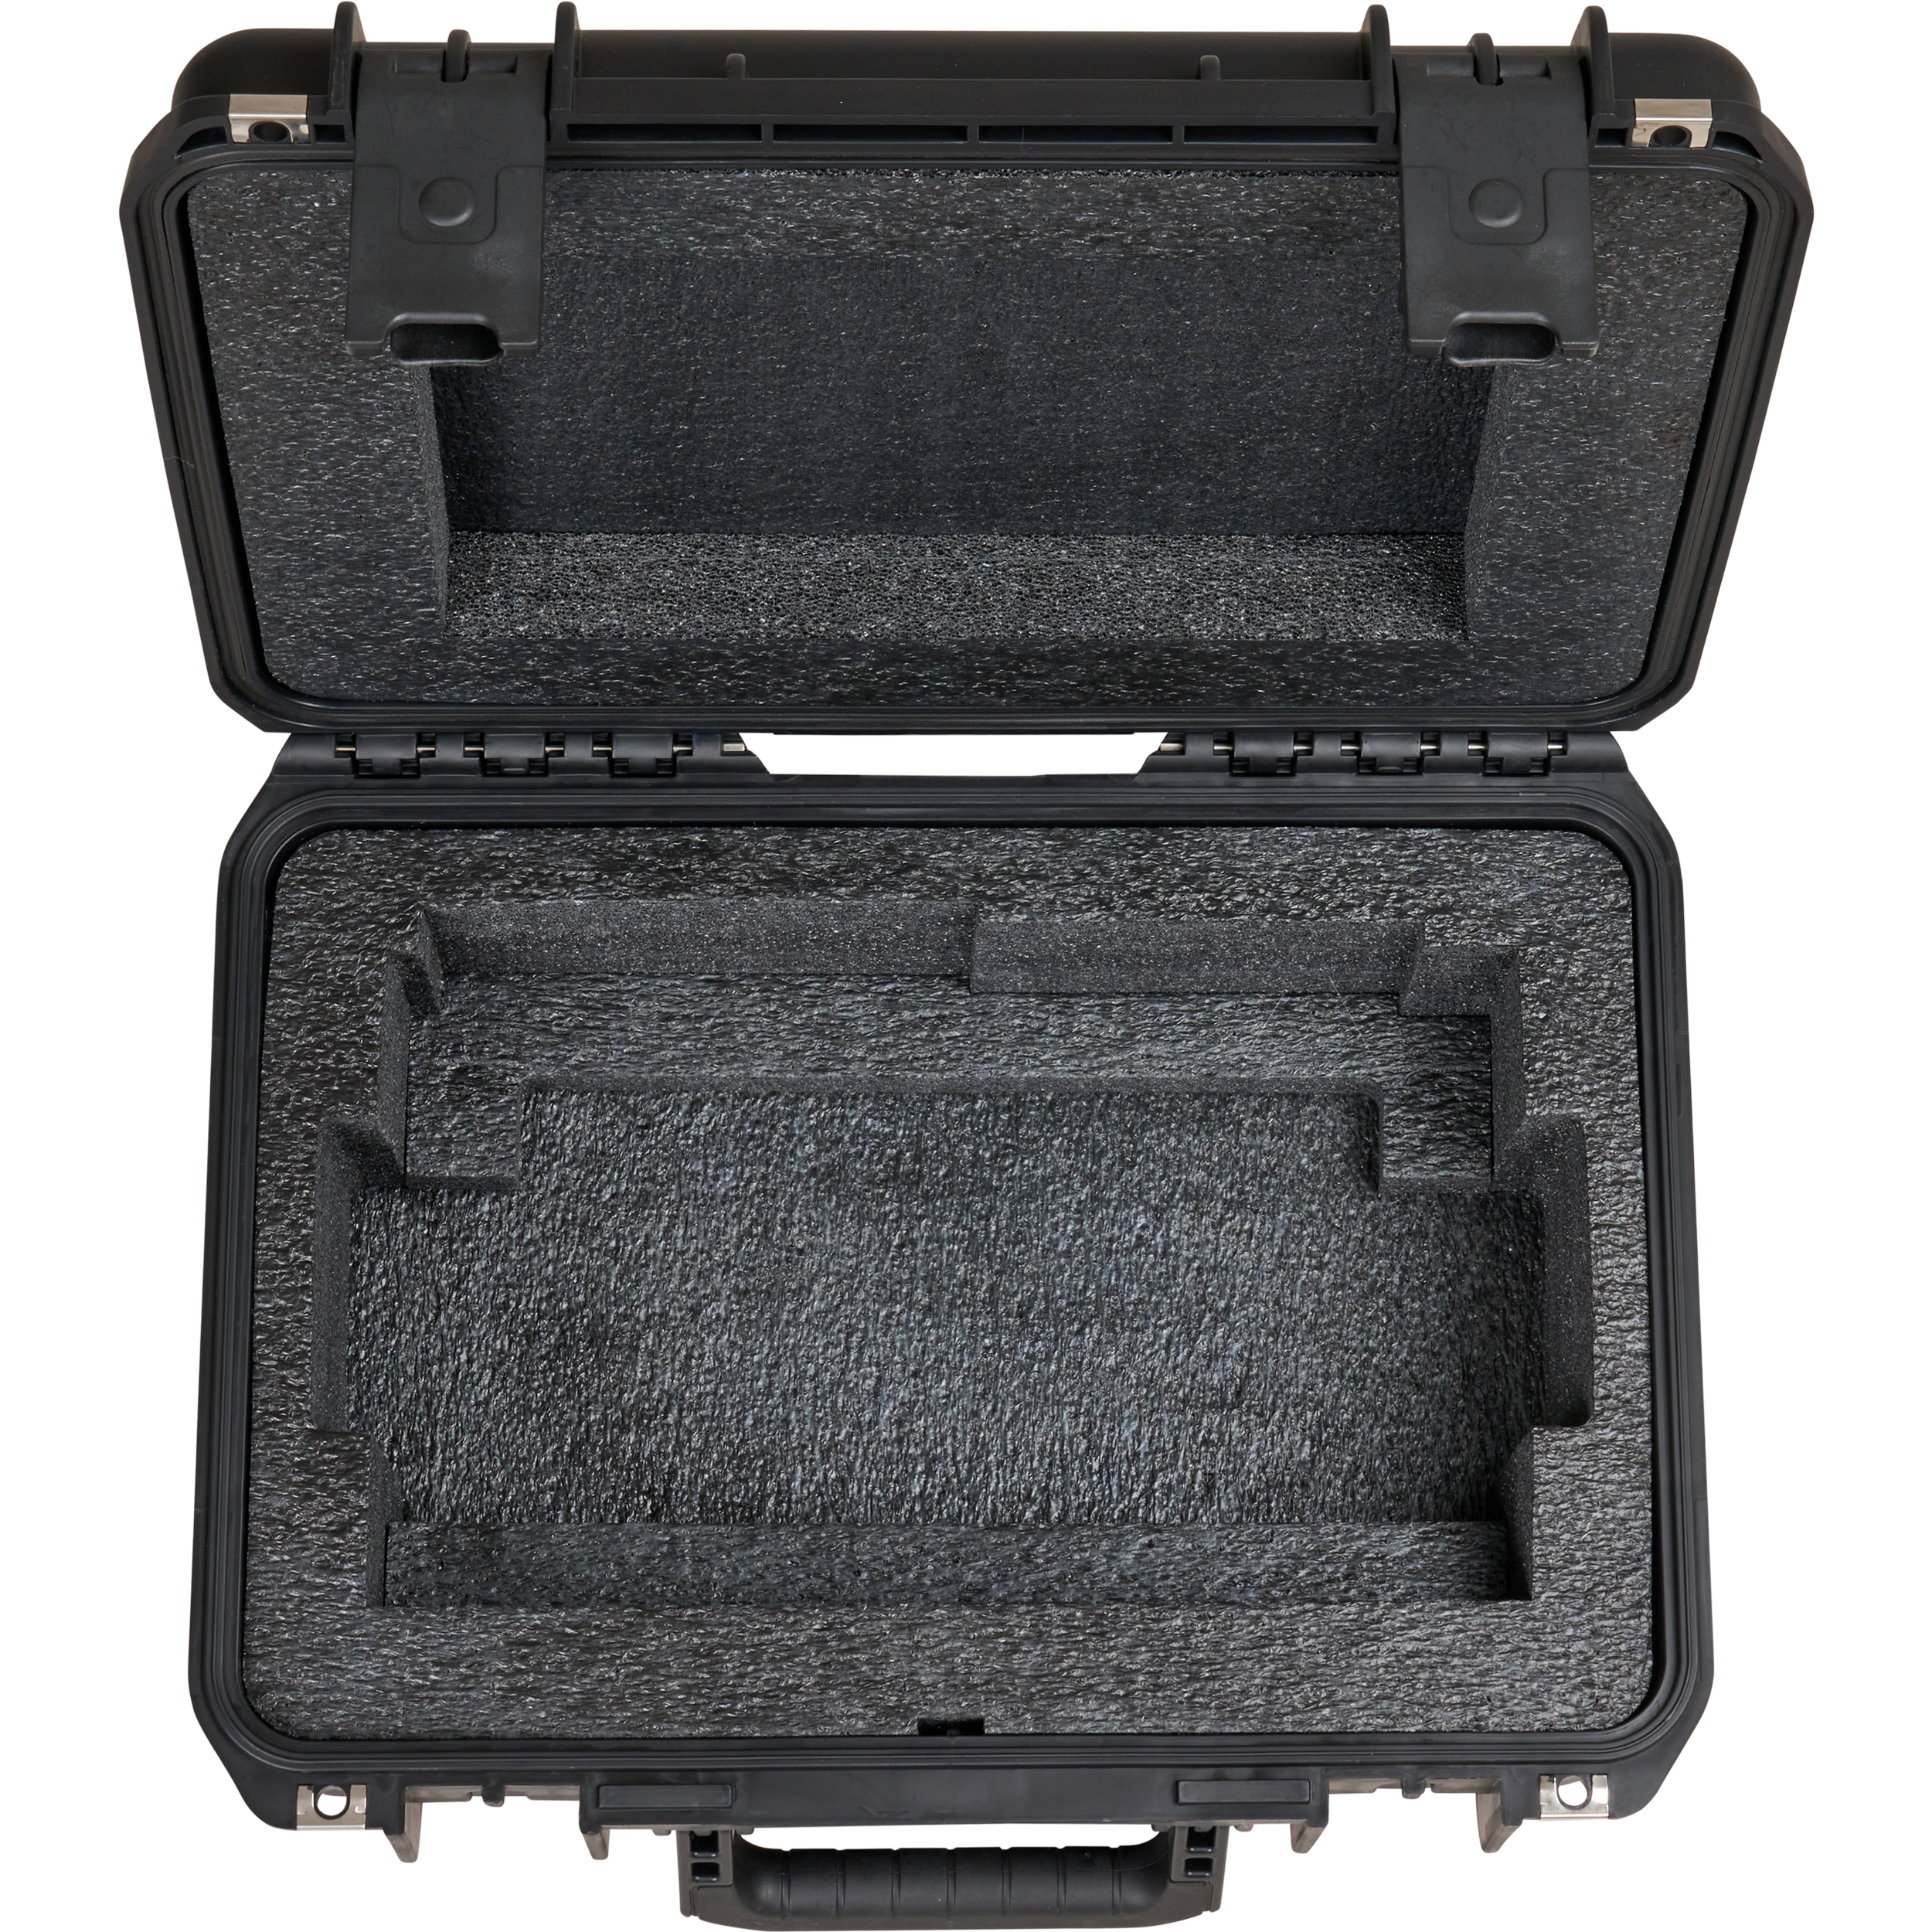 BYFP ipCase for Roland V-60HD